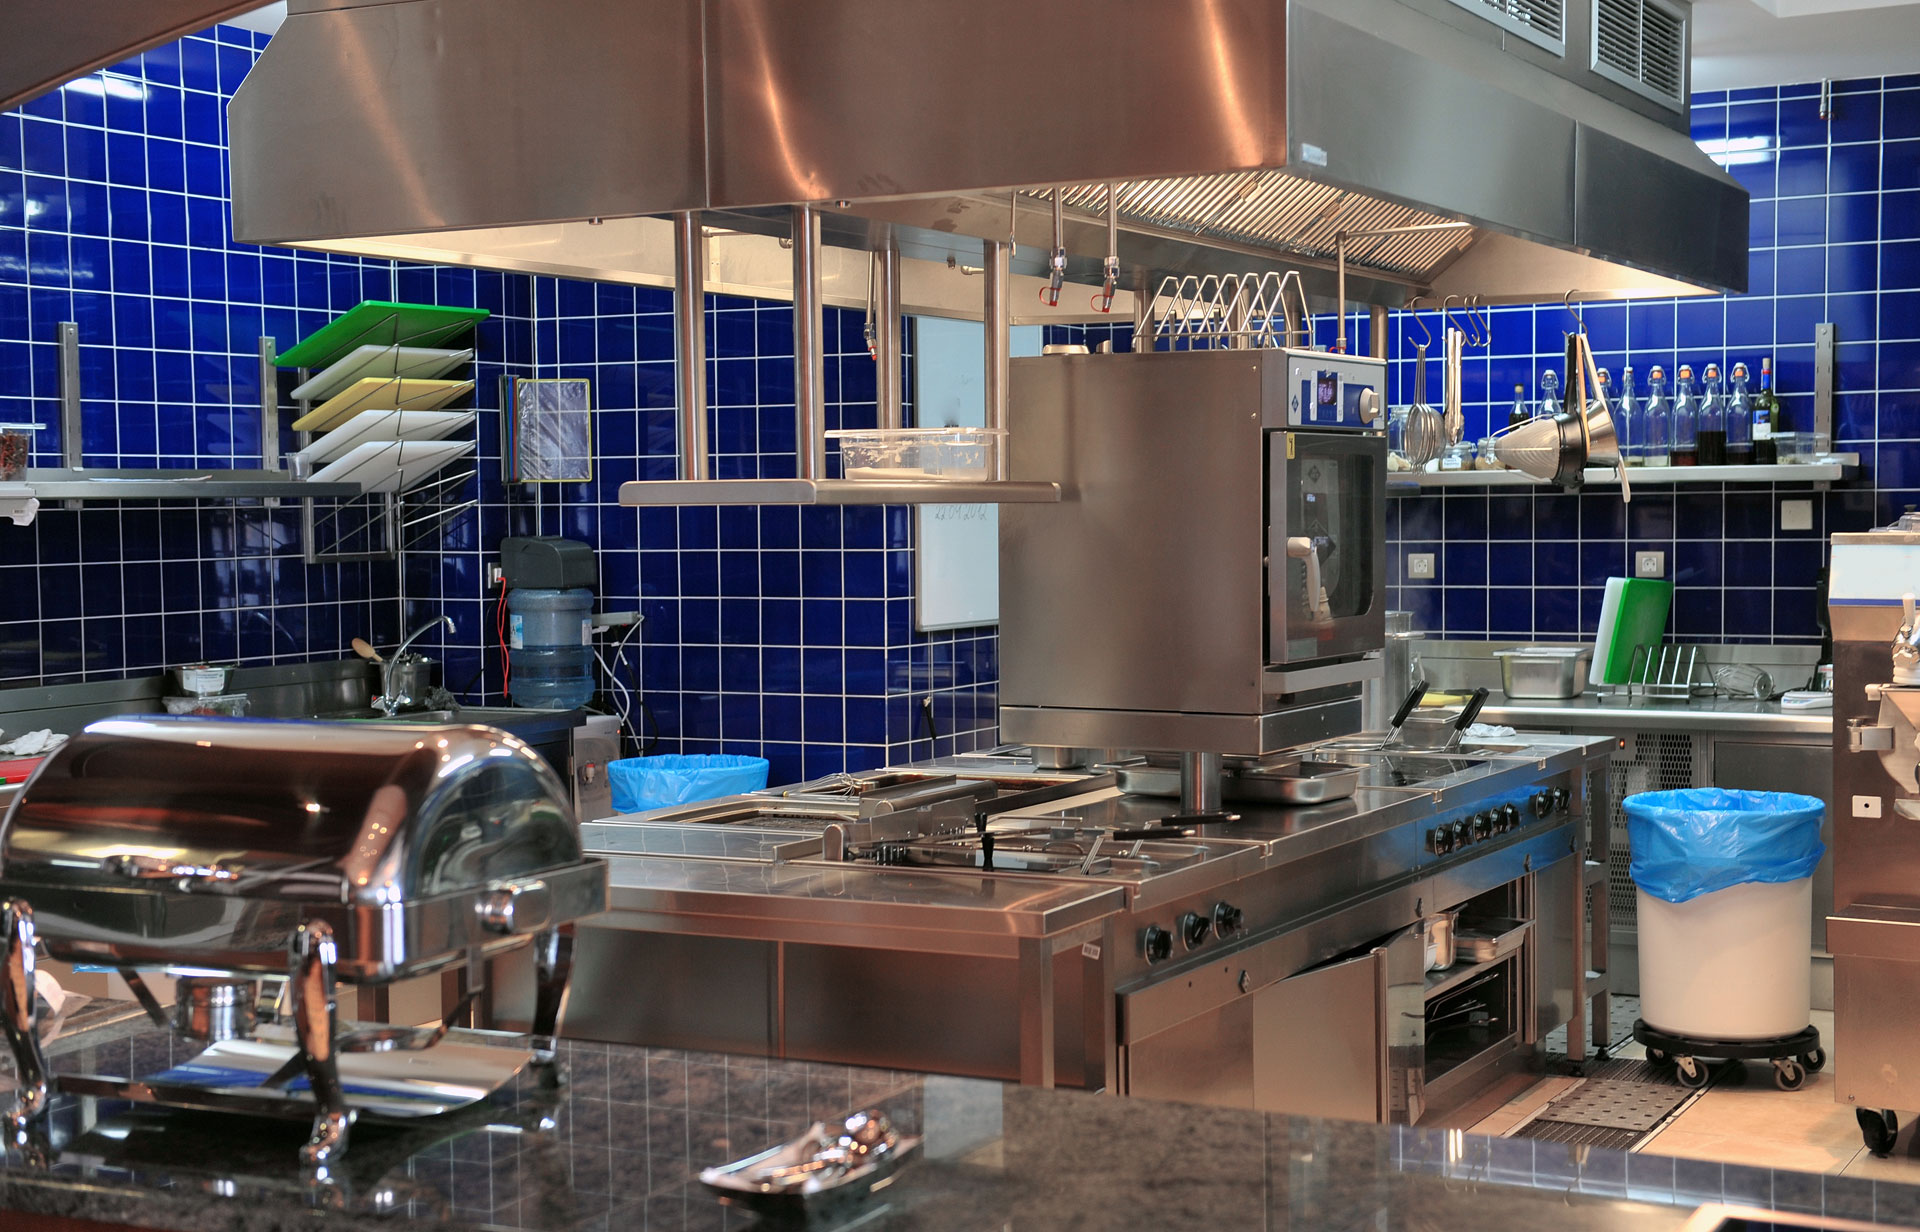 Cost Effective Solutions for Commercial Kitchen Maintenance